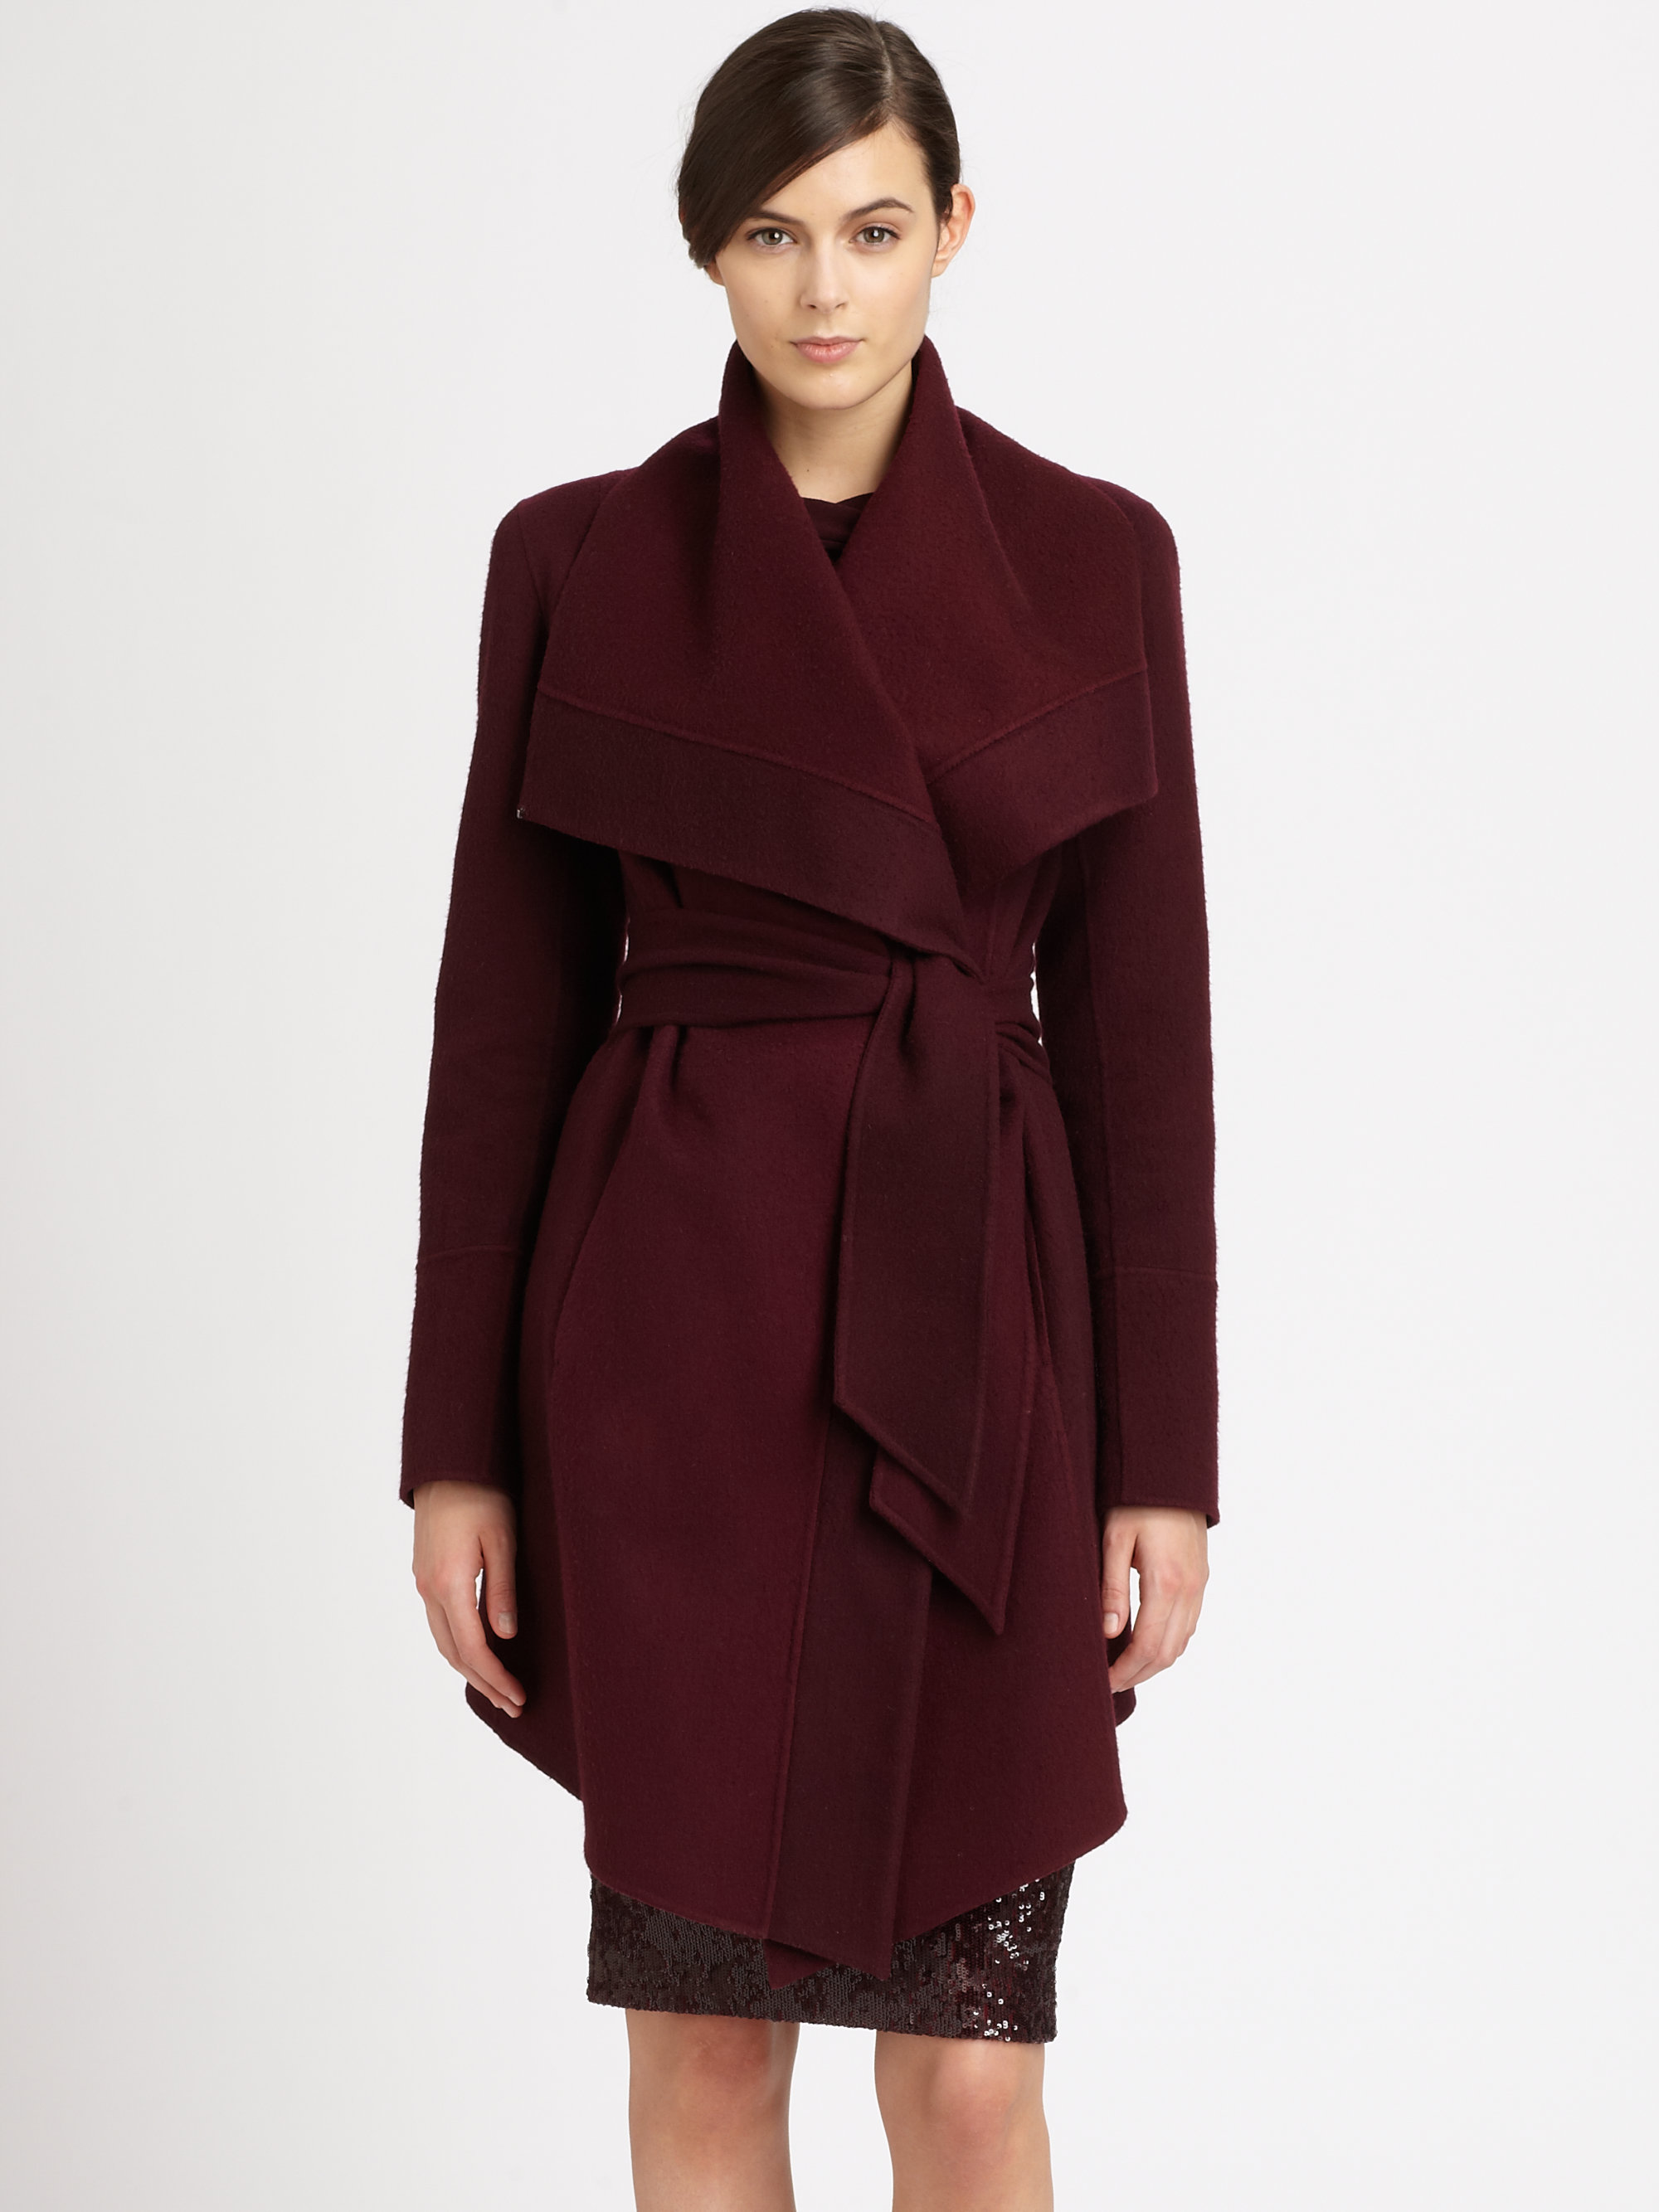 Lyst - Donna Karan Draped Cashmere Coat in Red